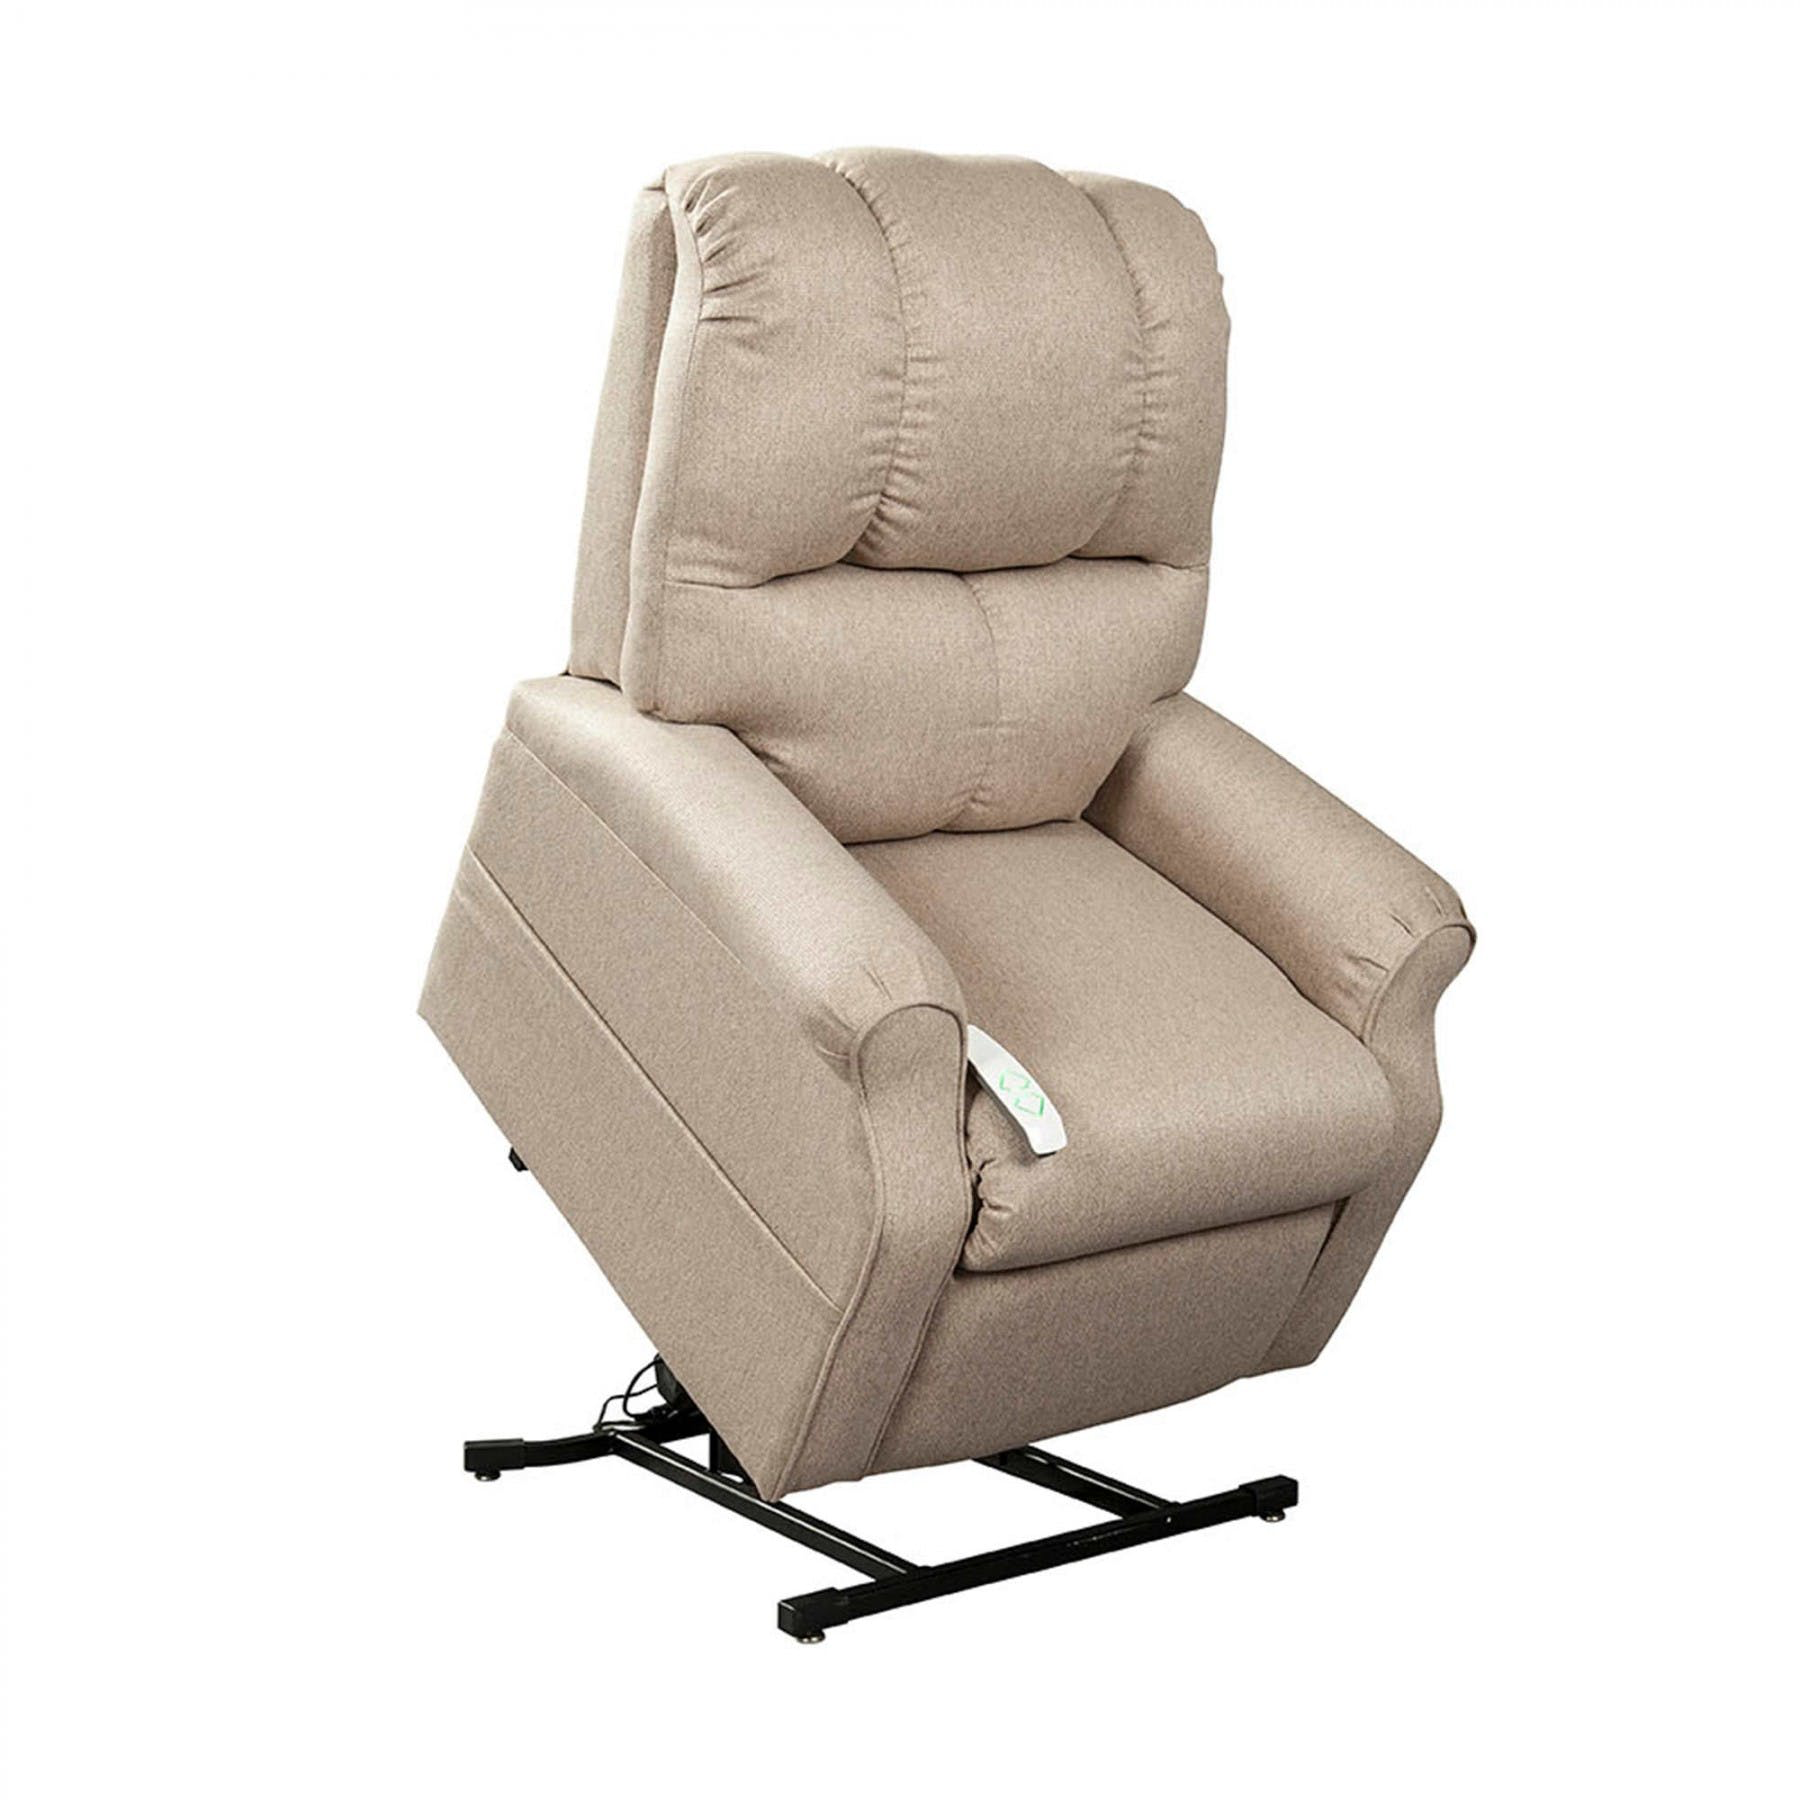 Up-Lift Seat Assist Chair Lift - Discontinued